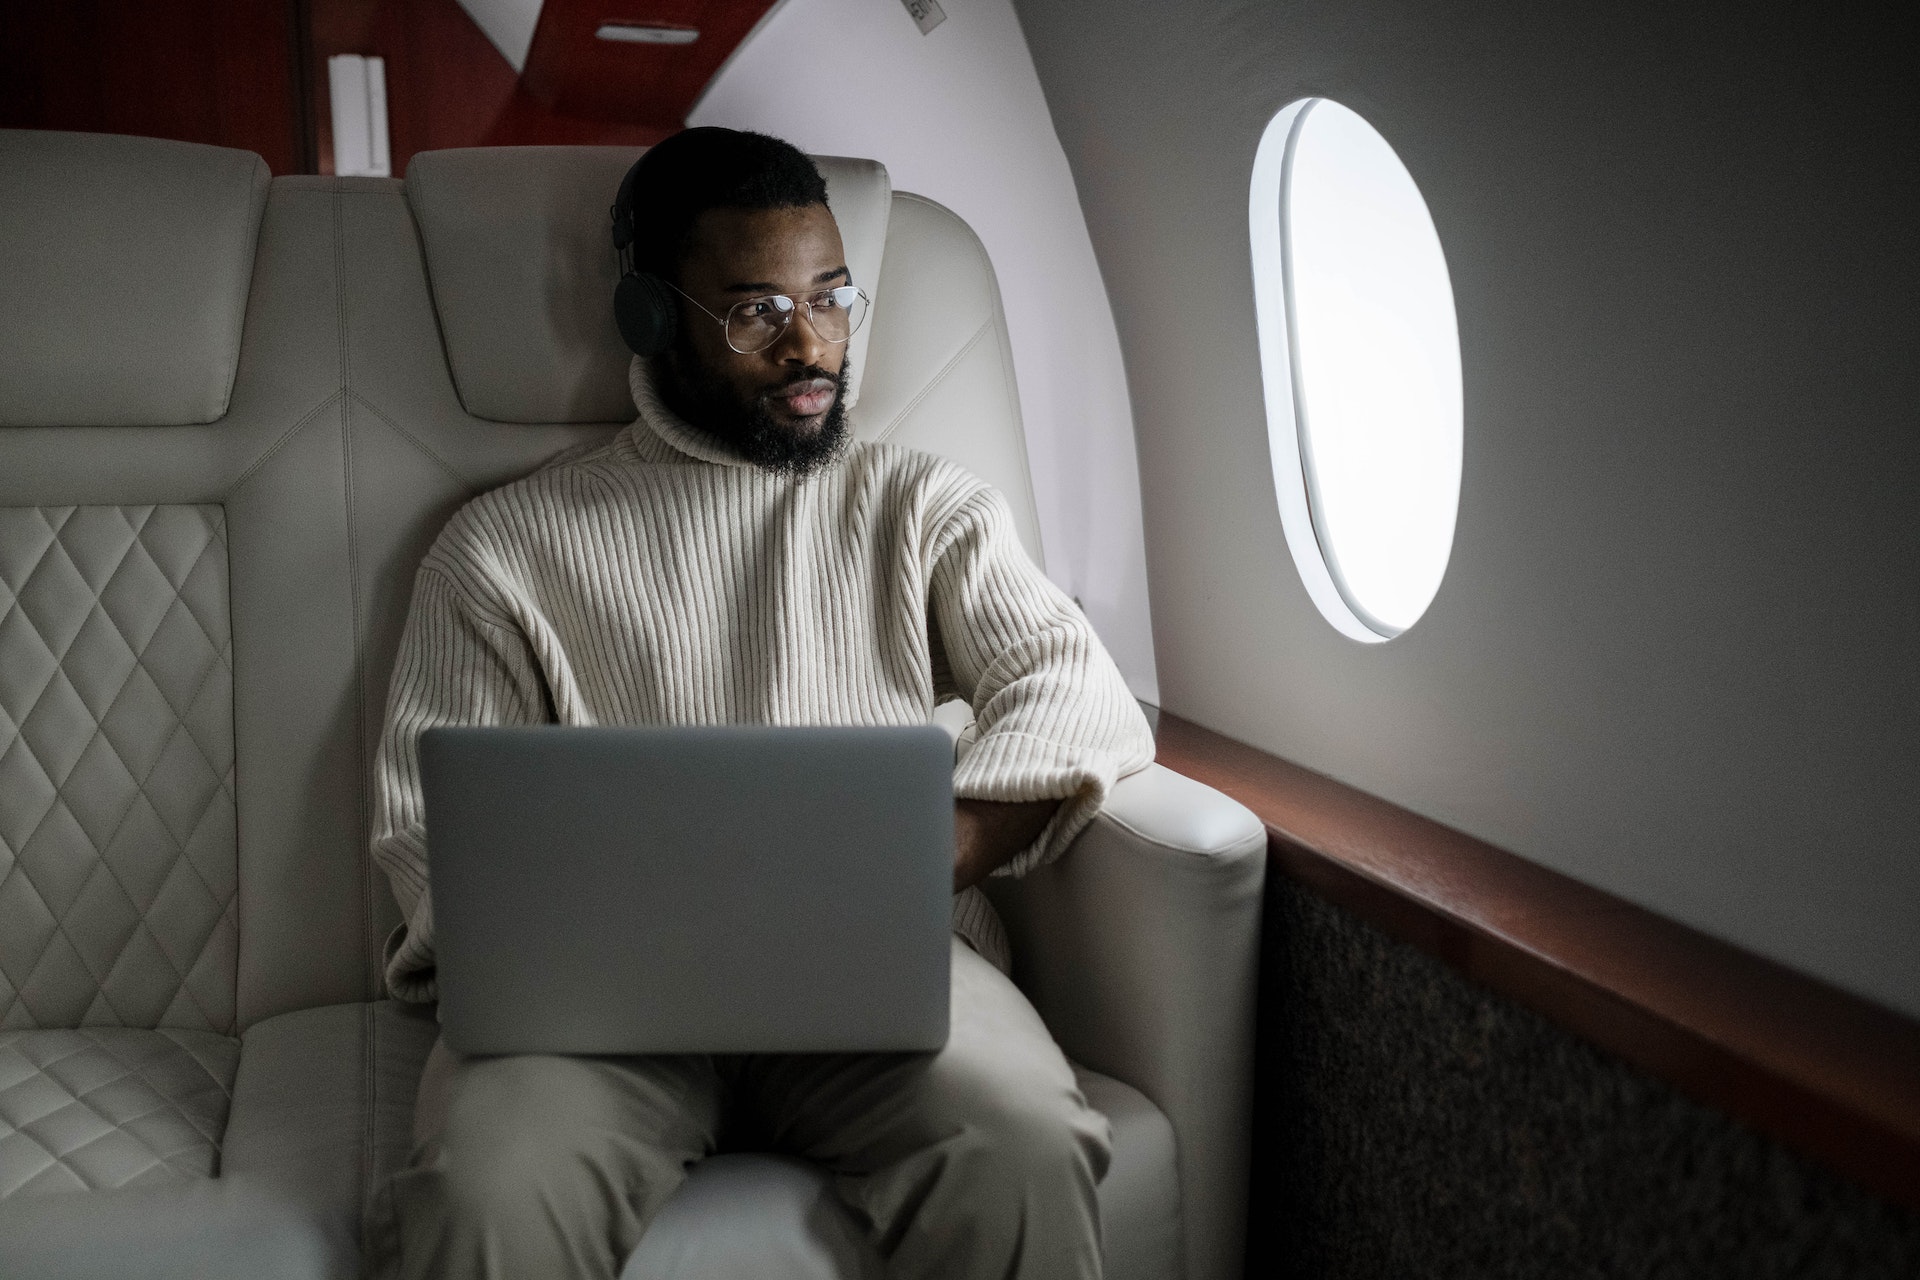 Man in tan sweater using a MacBook while sitting on a couch on an airplane